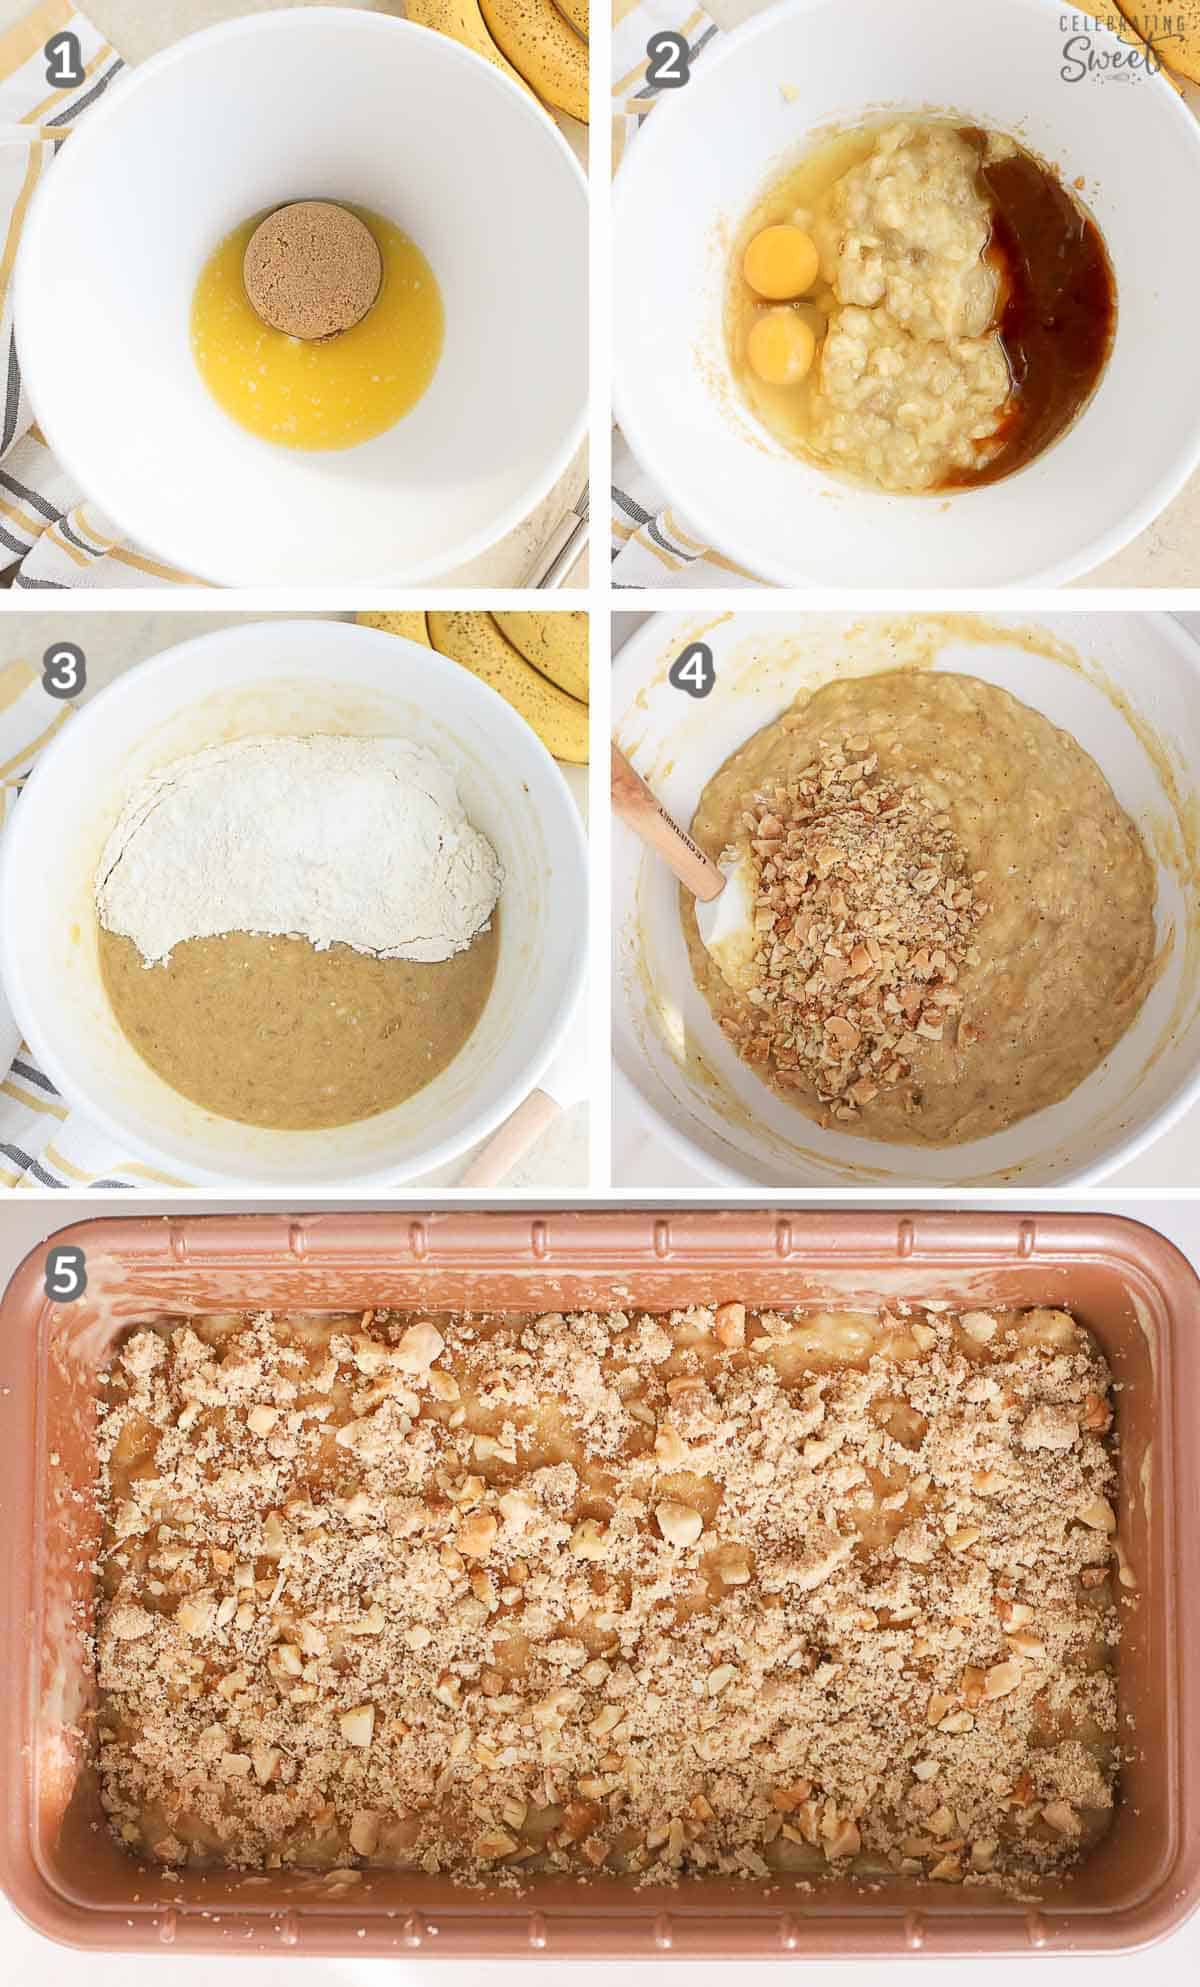 How to make banana nut bread collage. Batter in a white bowl and in a loaf pan.